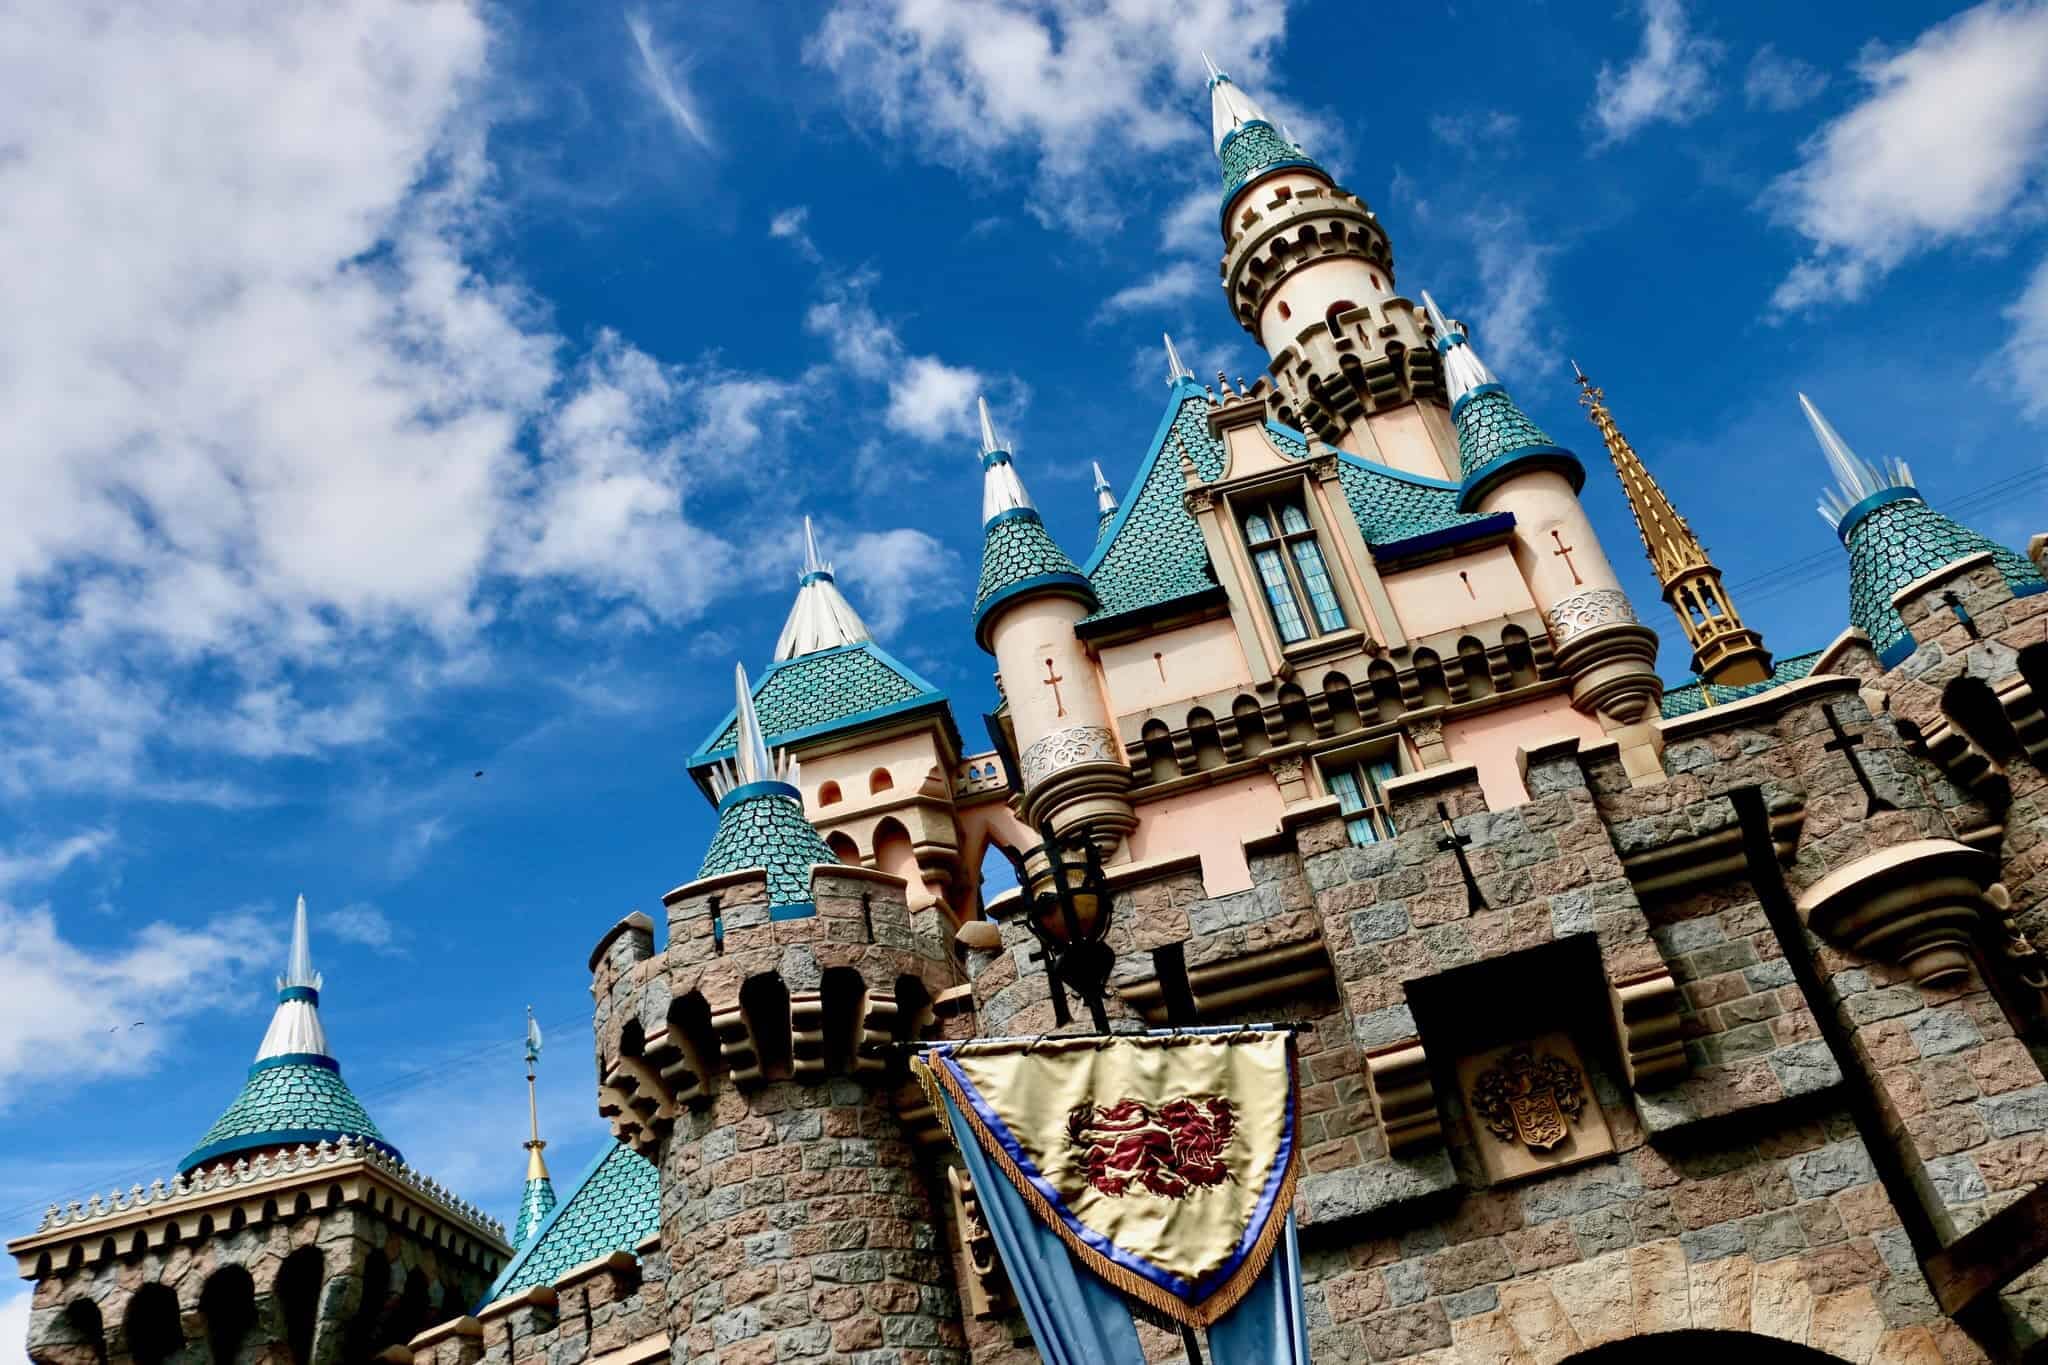 Download and Enjoy These Disneyland Sleeping Beauty Castle Wallpaper News Today